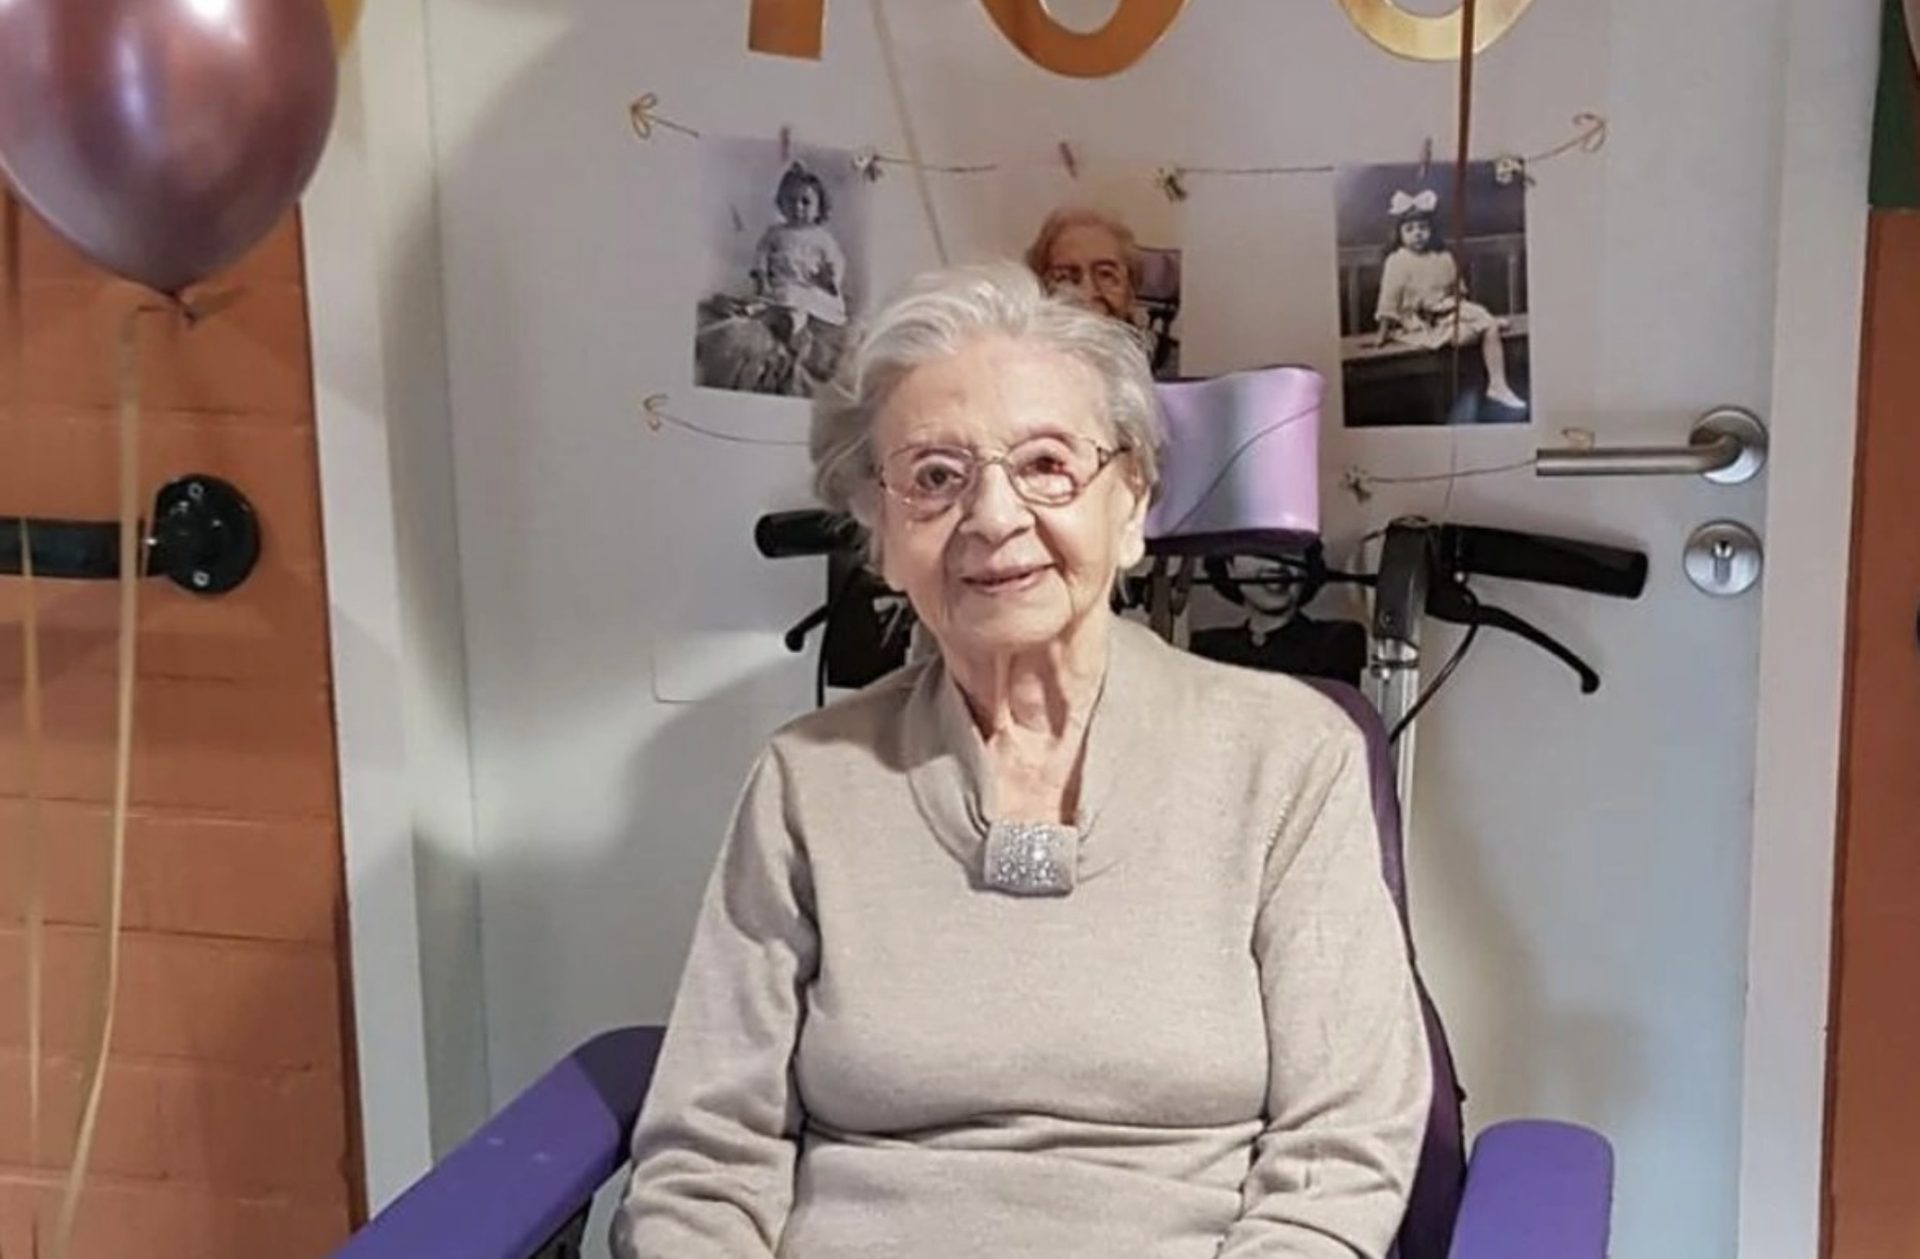 'She was very much loved': Belgium's oldest person dies at 111